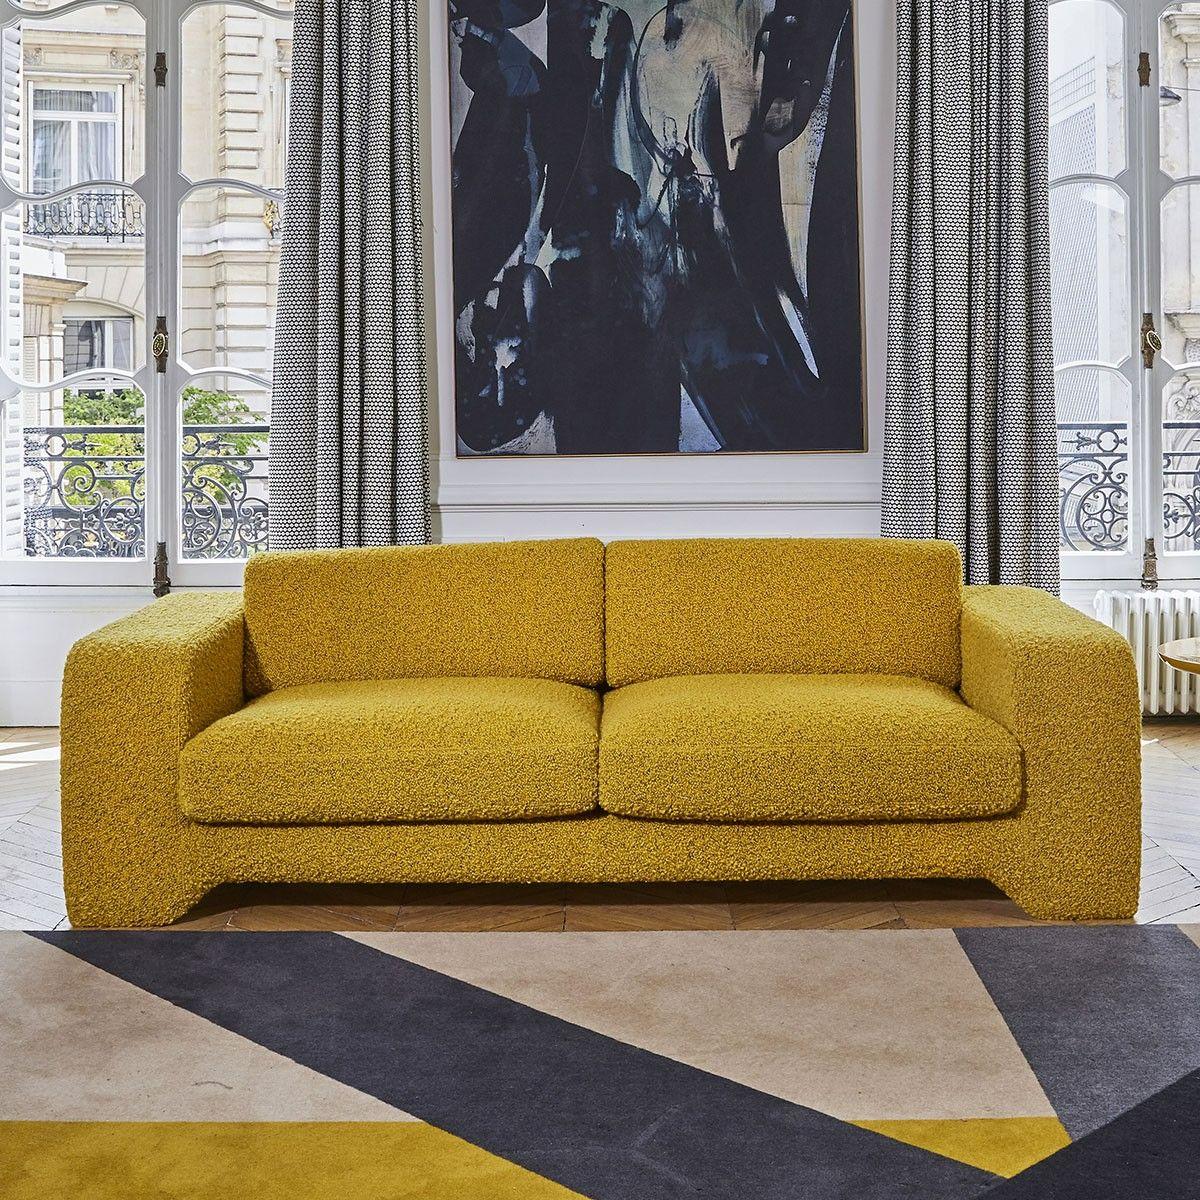 Popus Editions Giovanna 3 Seater Sofa in Vermilion Como Velvet Upholstery

Giovanna is a sofa with a strong profile. A sober, plush line, with this famous detail that changes everything, so as not to forget its strength of character and this